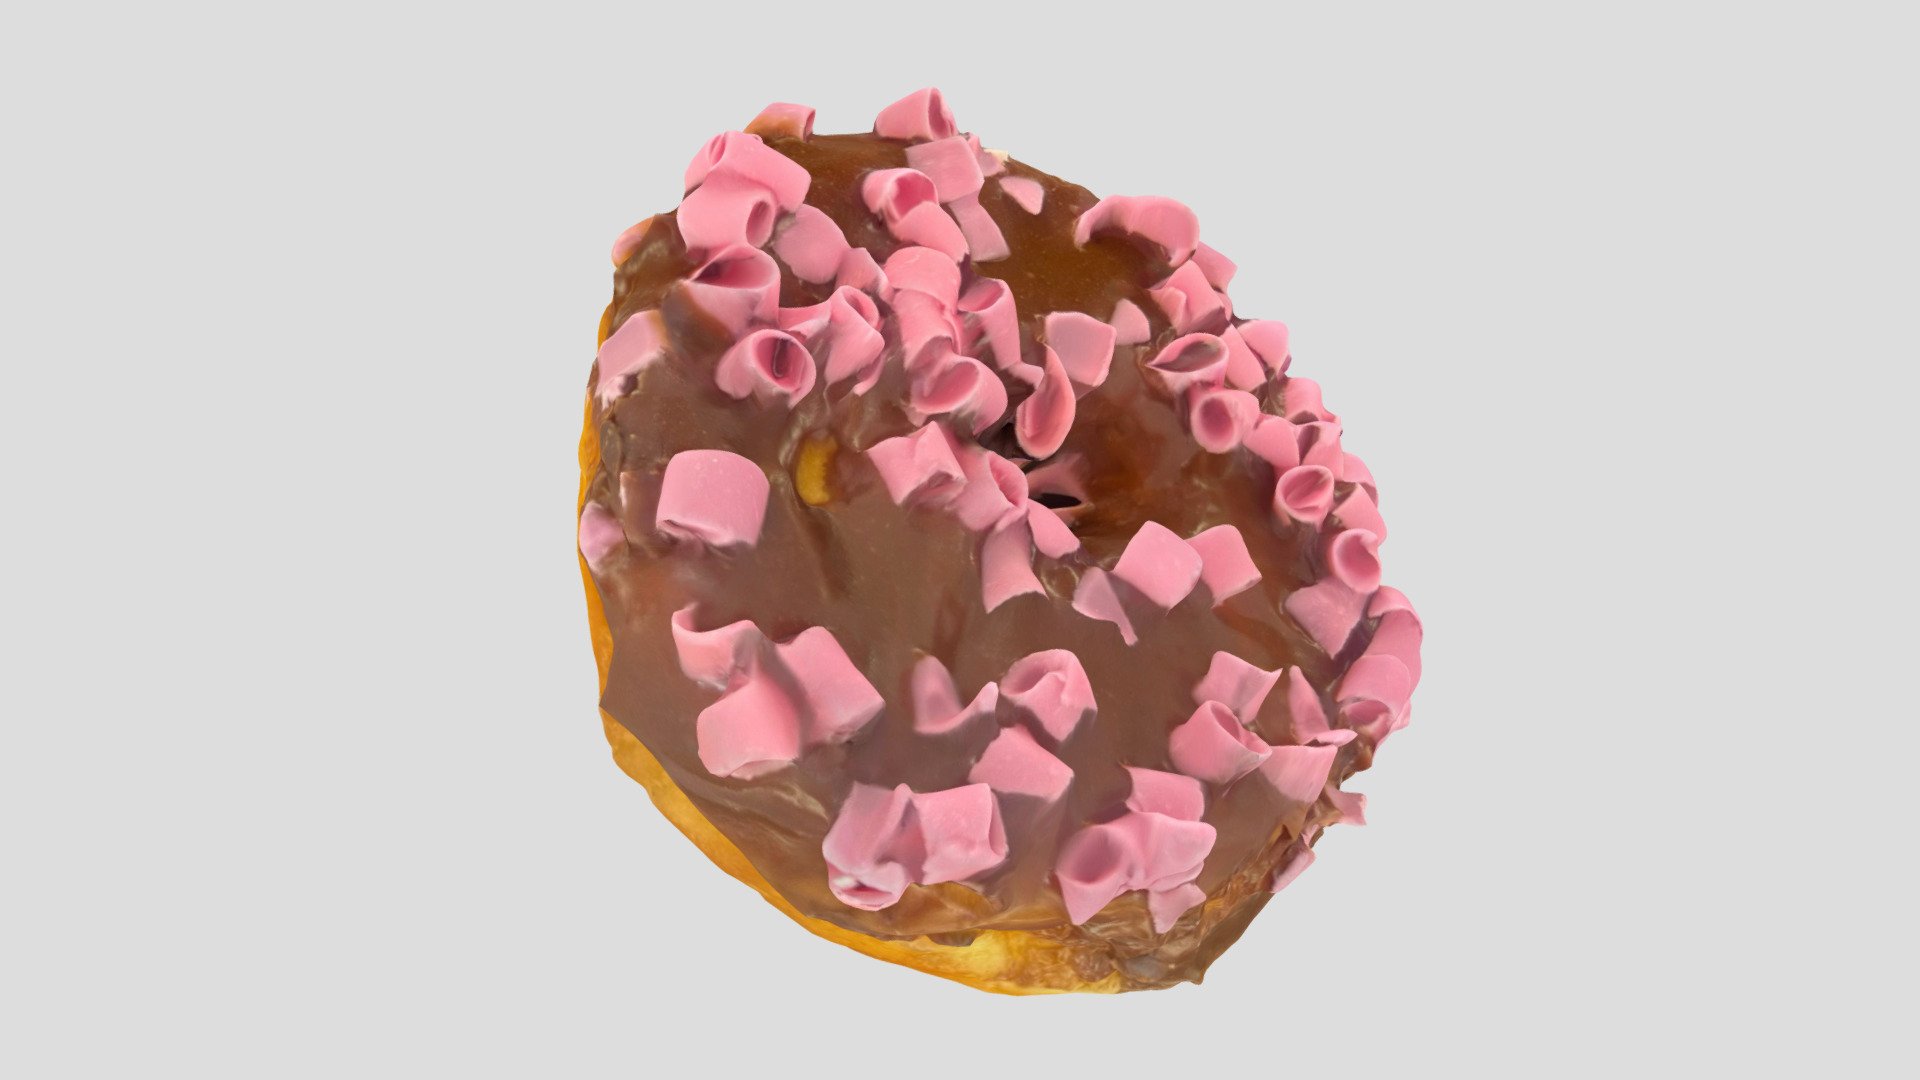 Chocolate frosted donut with pink ribbons 3D model scanned using photogrammetry on an iphone. This goes great with coffee, and breakfast or dessert scenes. Suitable for environments, props, etc. Created with Polycam - Chocolate Donut 🍩 - 3D model by Cam Cottrill (@camcottrill) 3d model